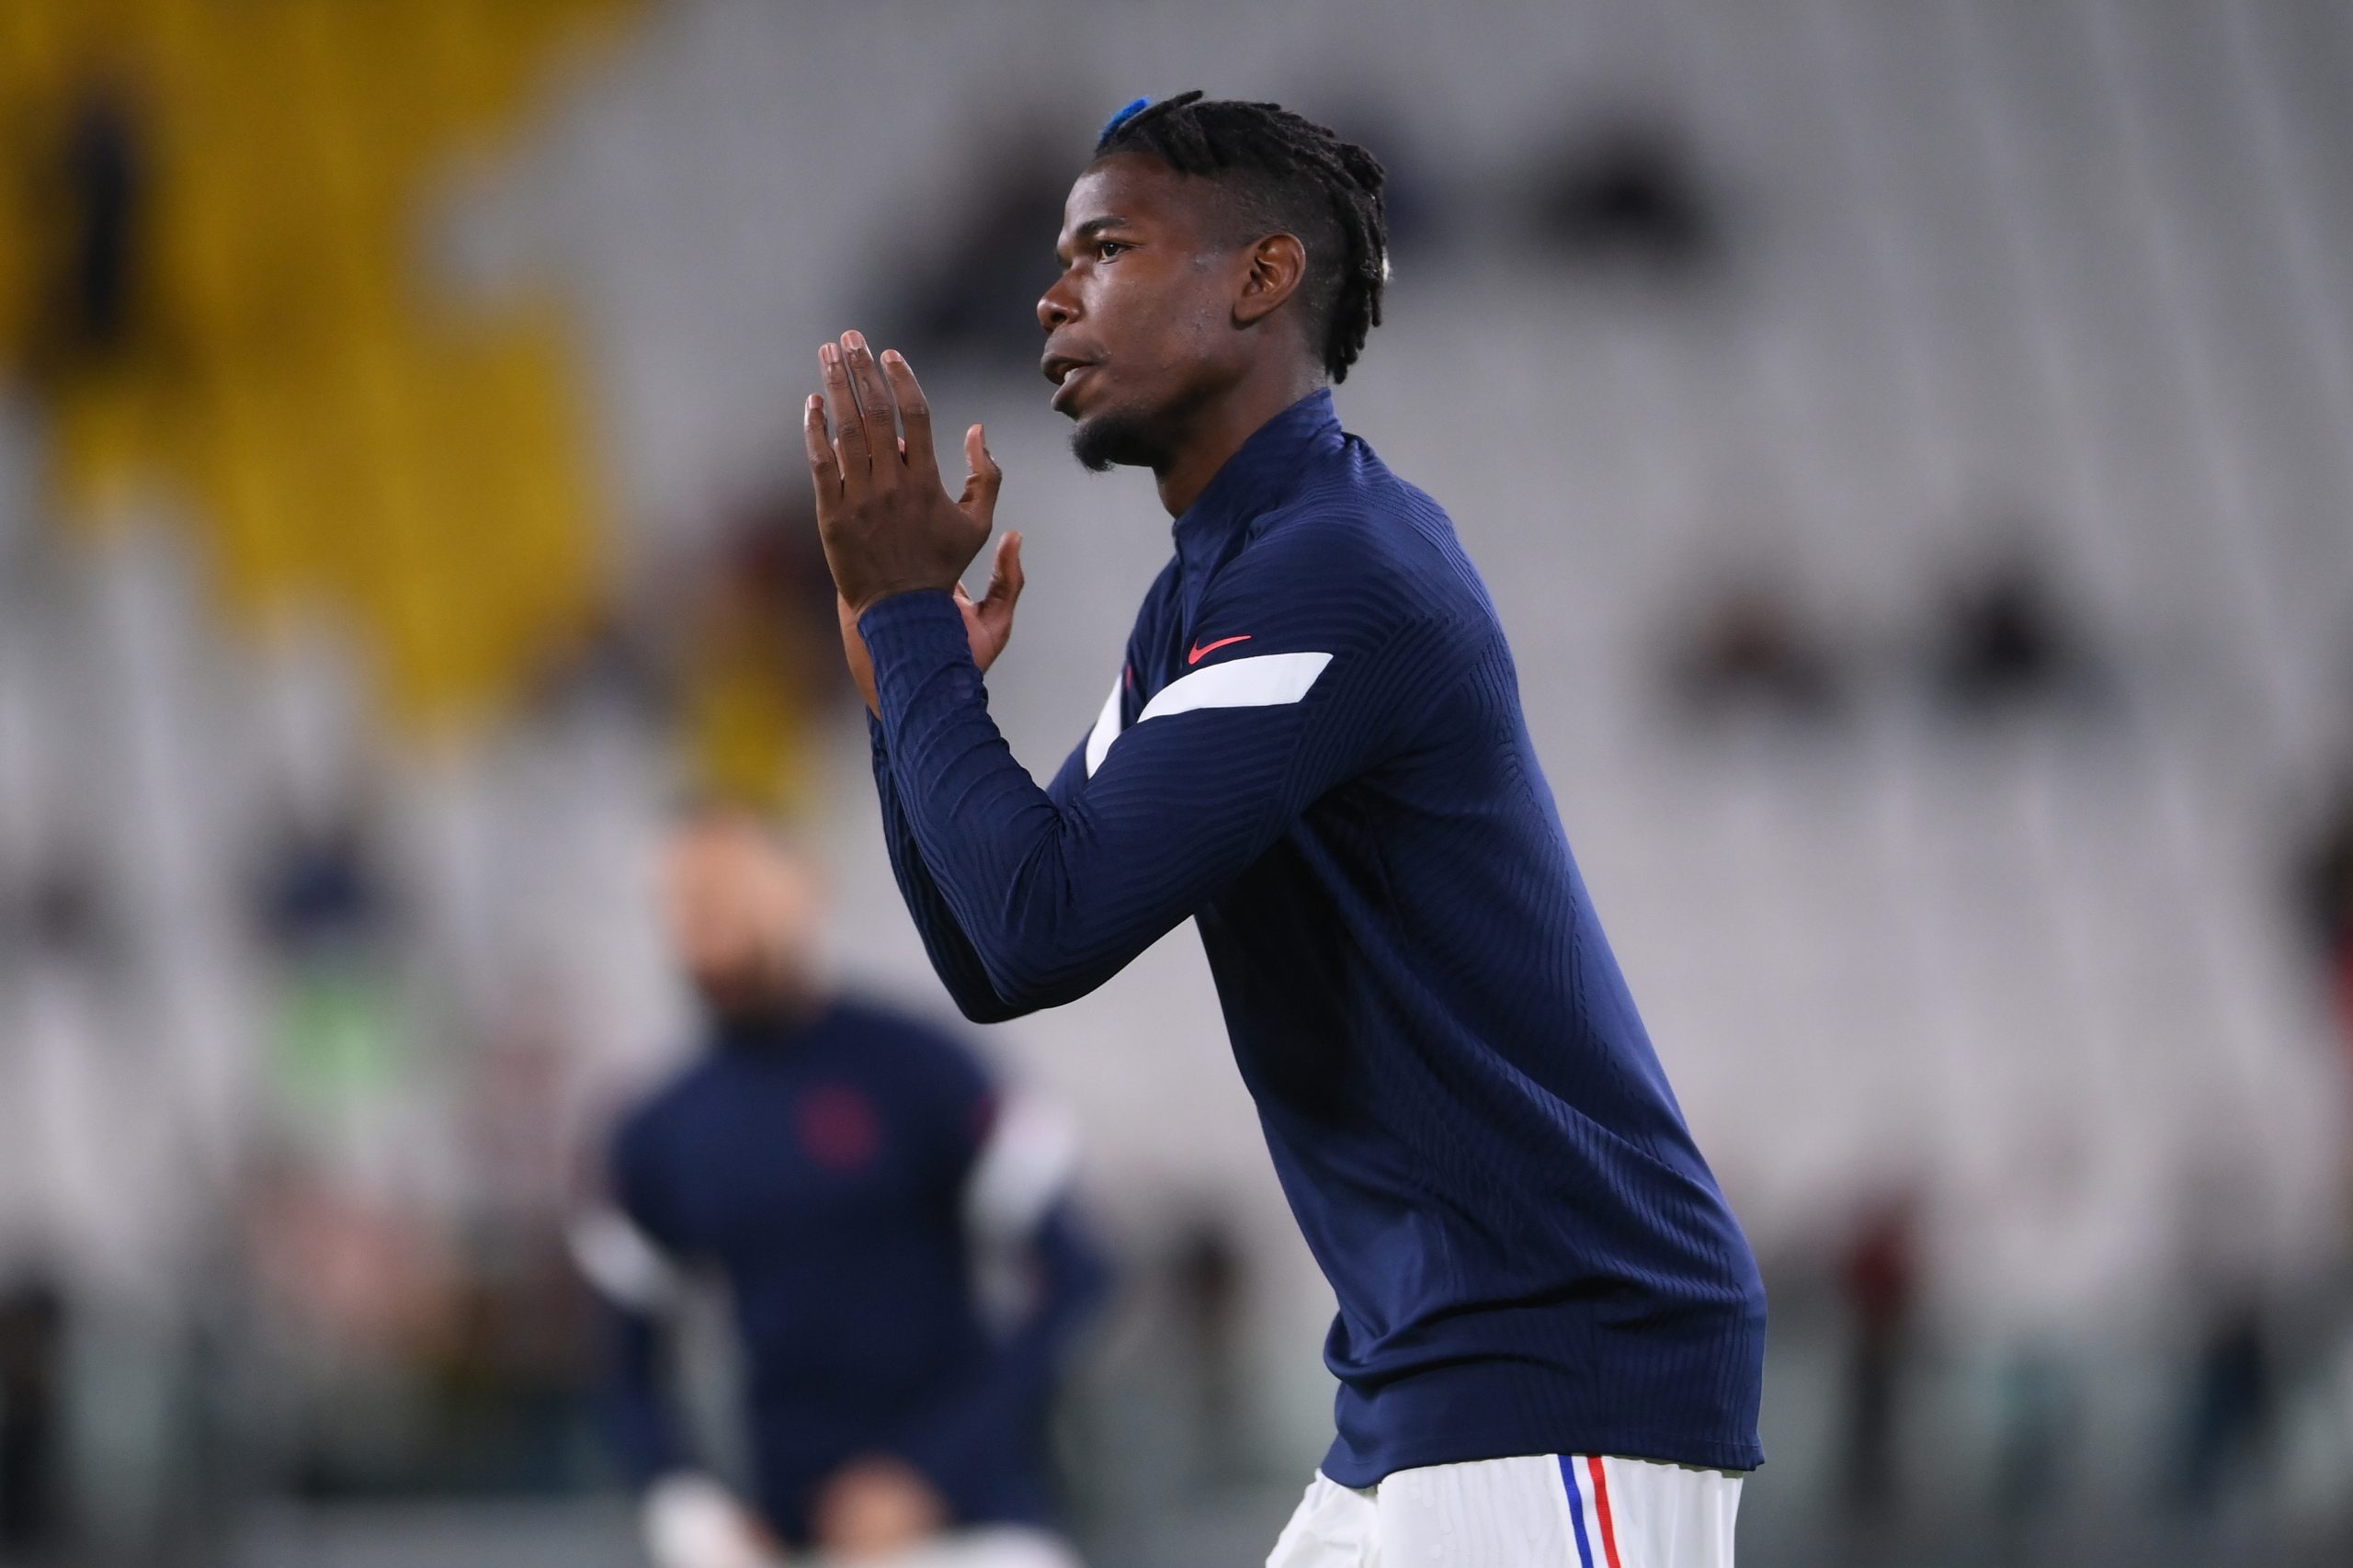 Manchester United are still waiting for French superstar Paul Pogba to make up his mind as the 2022 summer transfer window nears.